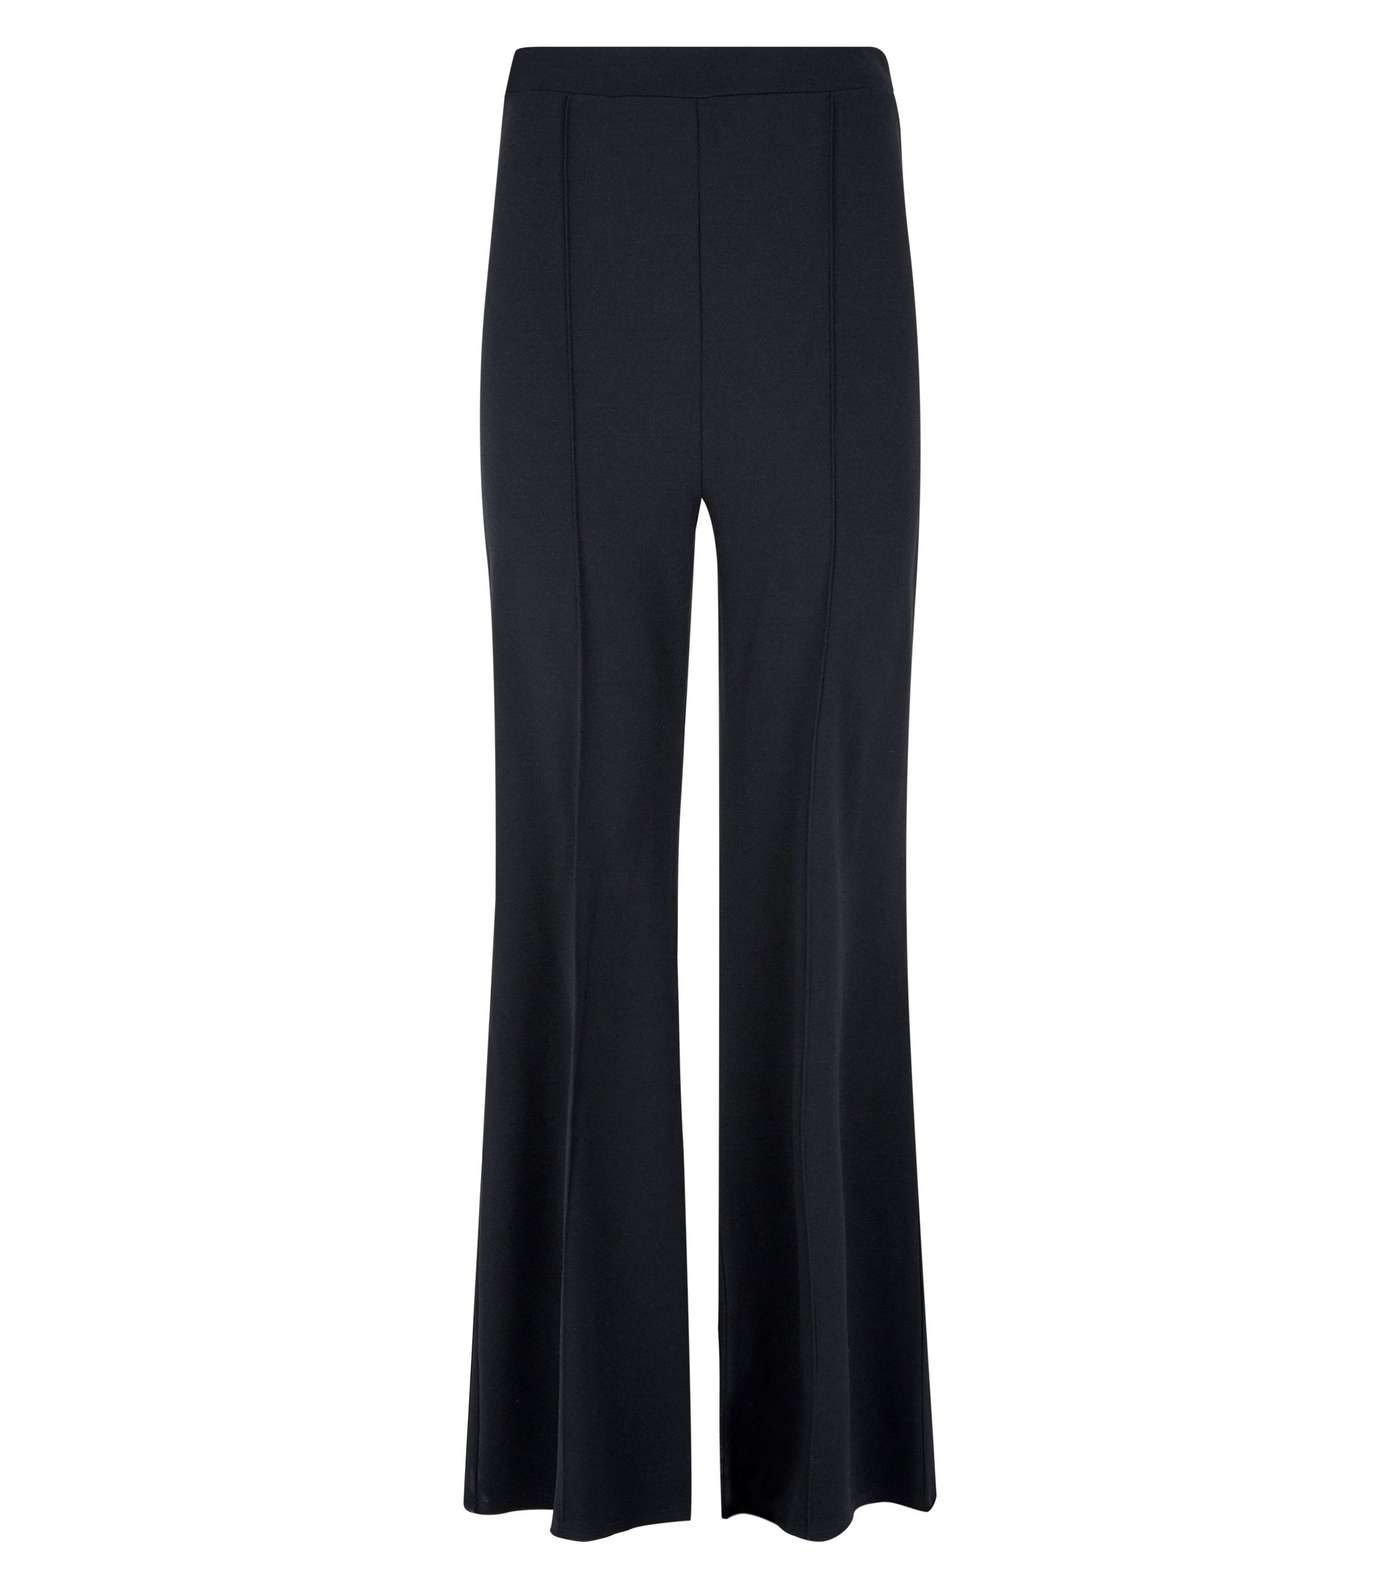 Cameo Rose Black Piped Flared Trousers Image 4